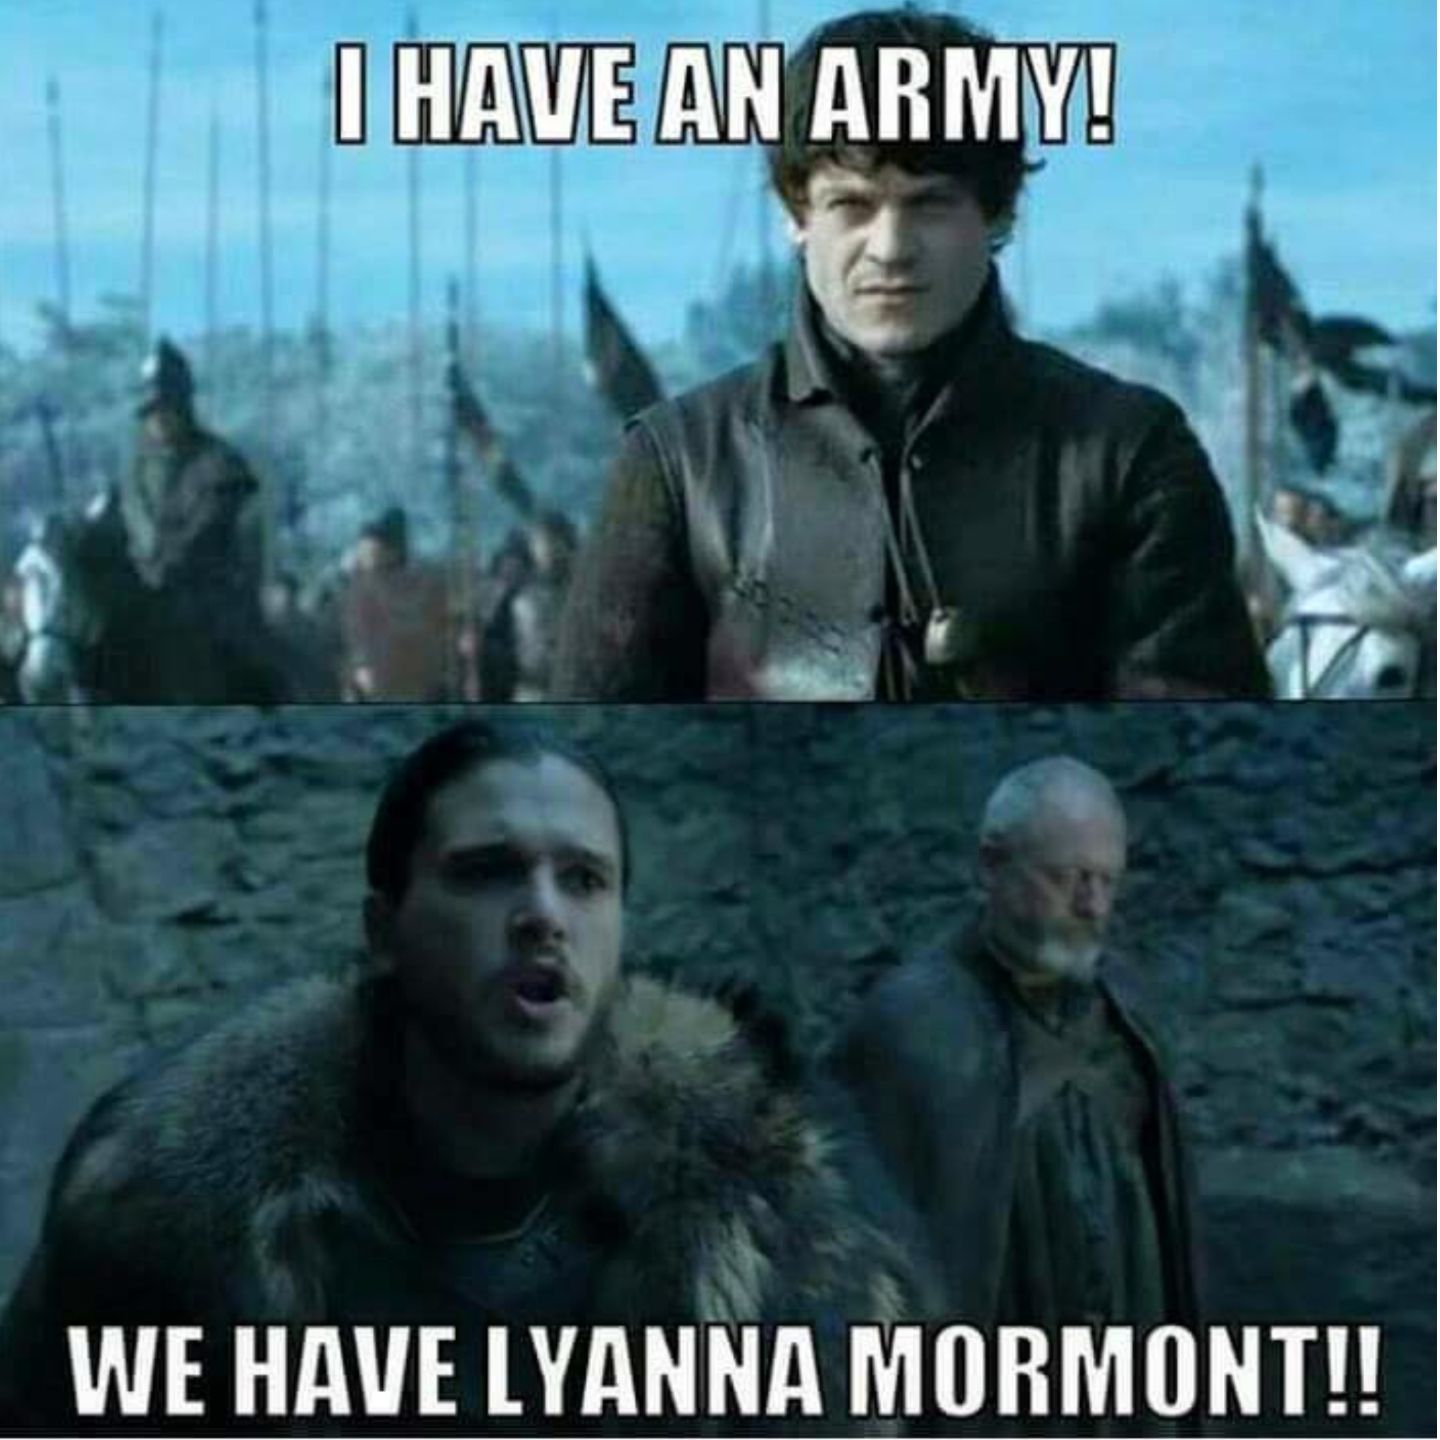 Meme about Ramsay's army in the Battle of the Bastards. 